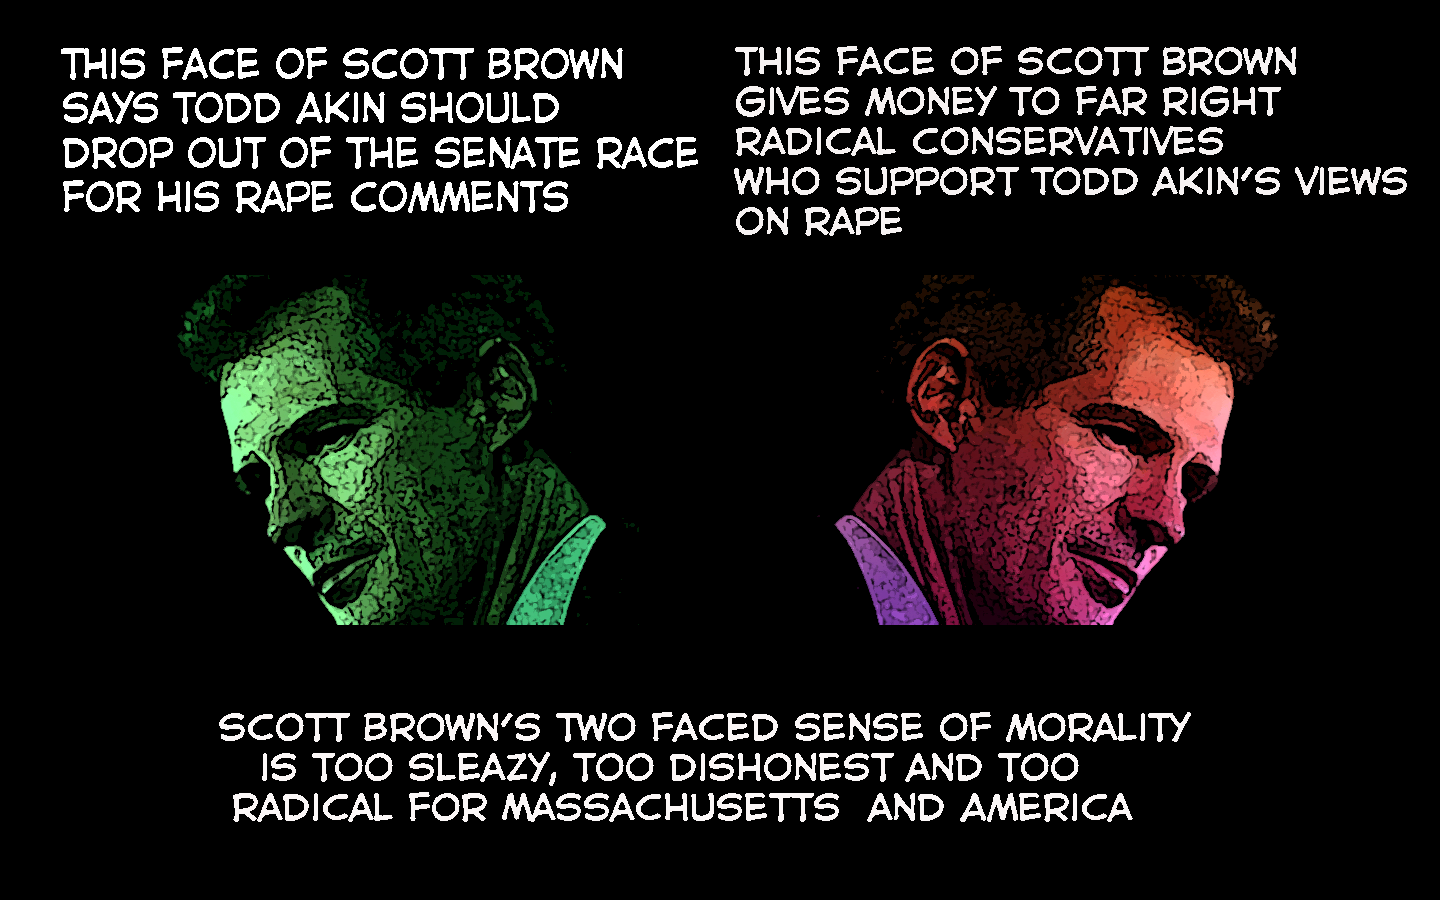 Scott+Brown+is+too+sleazy+and+too+dishonest+for+Massachusetts+and+America.png